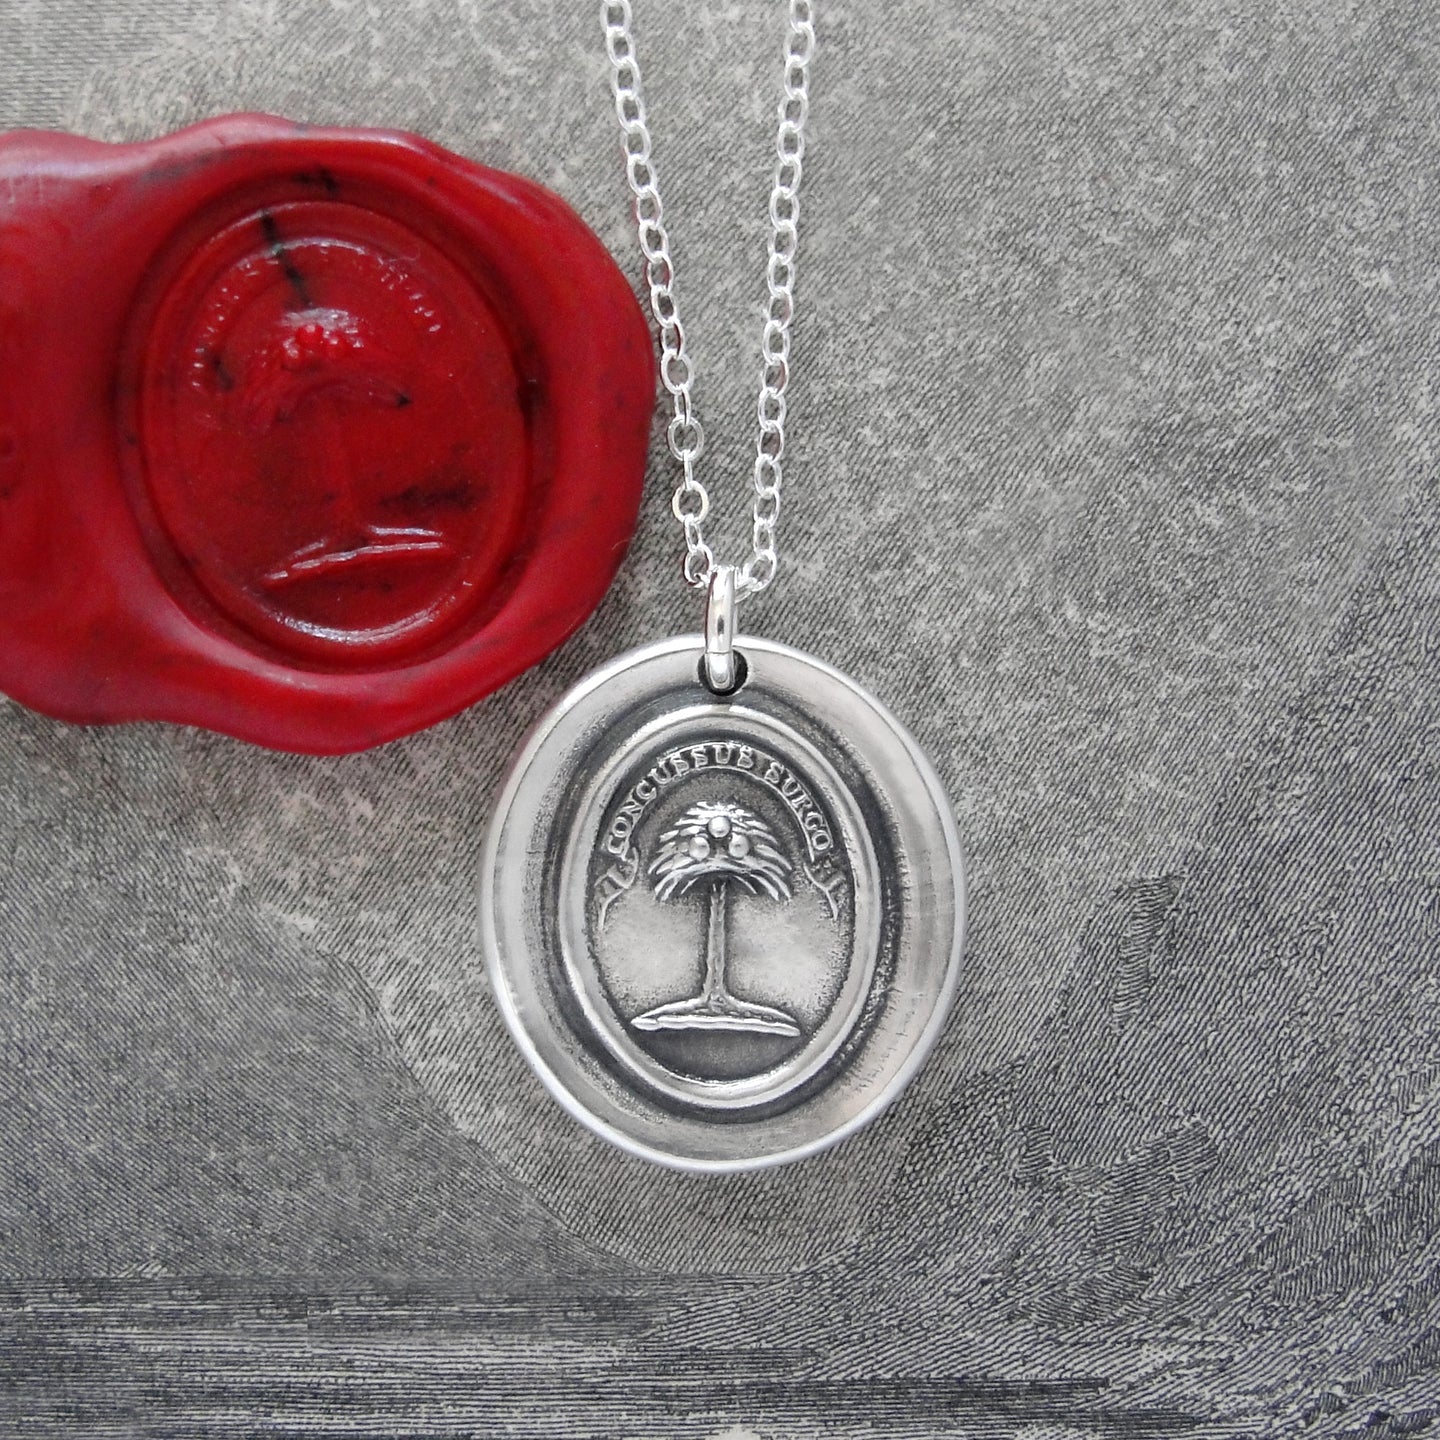 Silver Wax Seal Necklace with Palm Tree - When Struck I Rise - RQP Studio